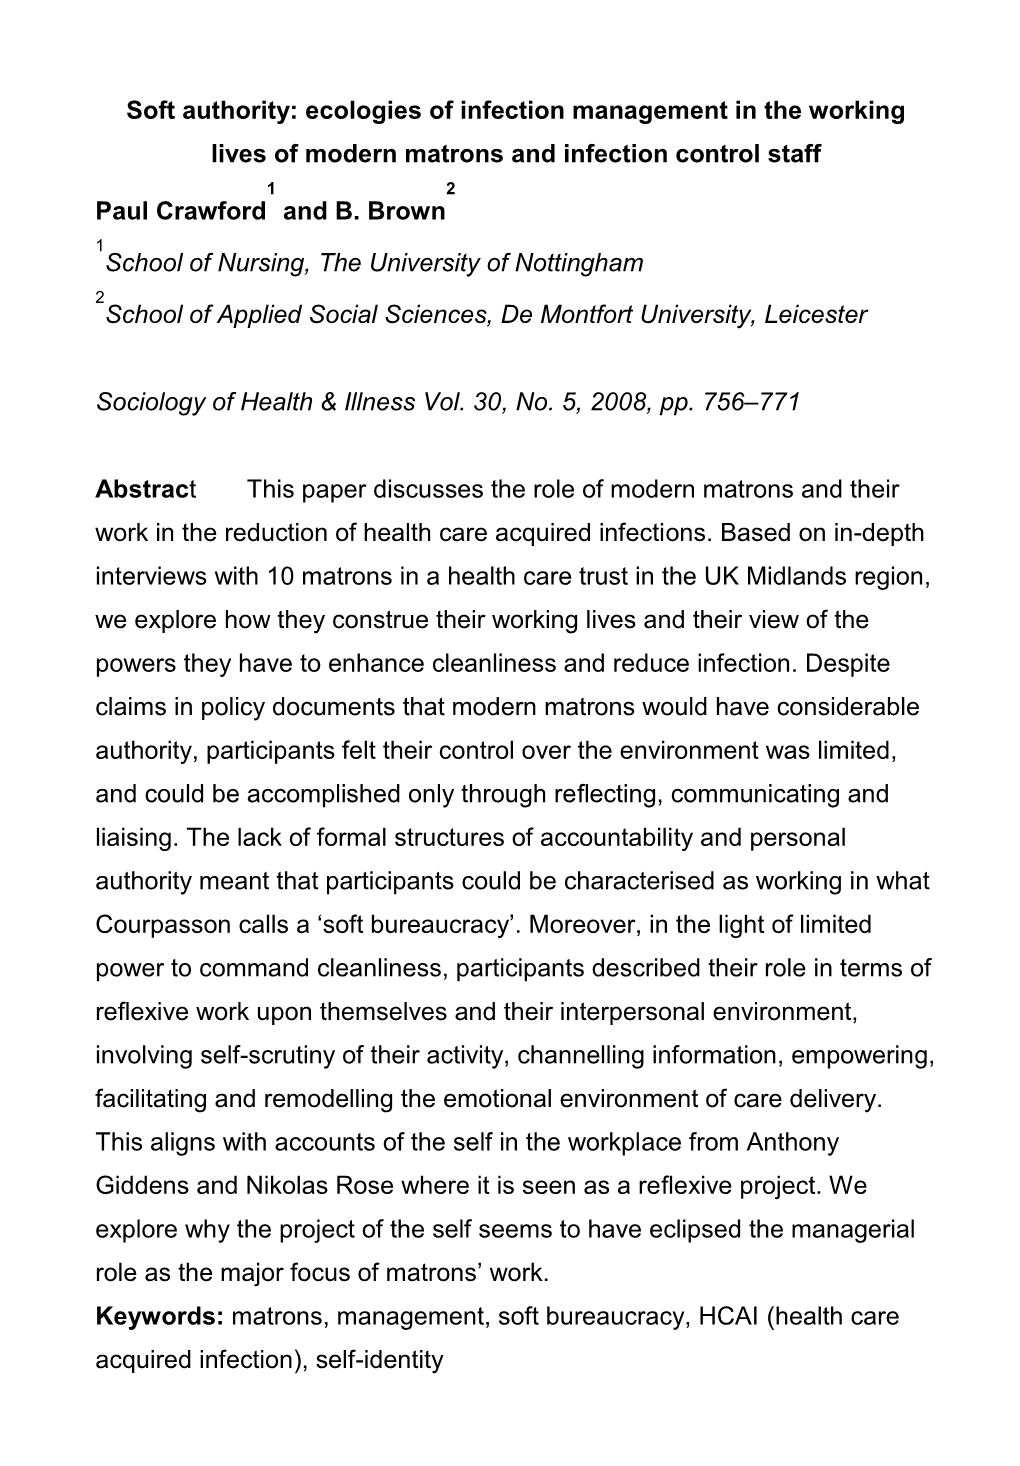 Soft Authority: Ecologies of Infection Management in the Working Lives of Modern Matrons and Infection Control Staff 1 2 Paul Crawford and B